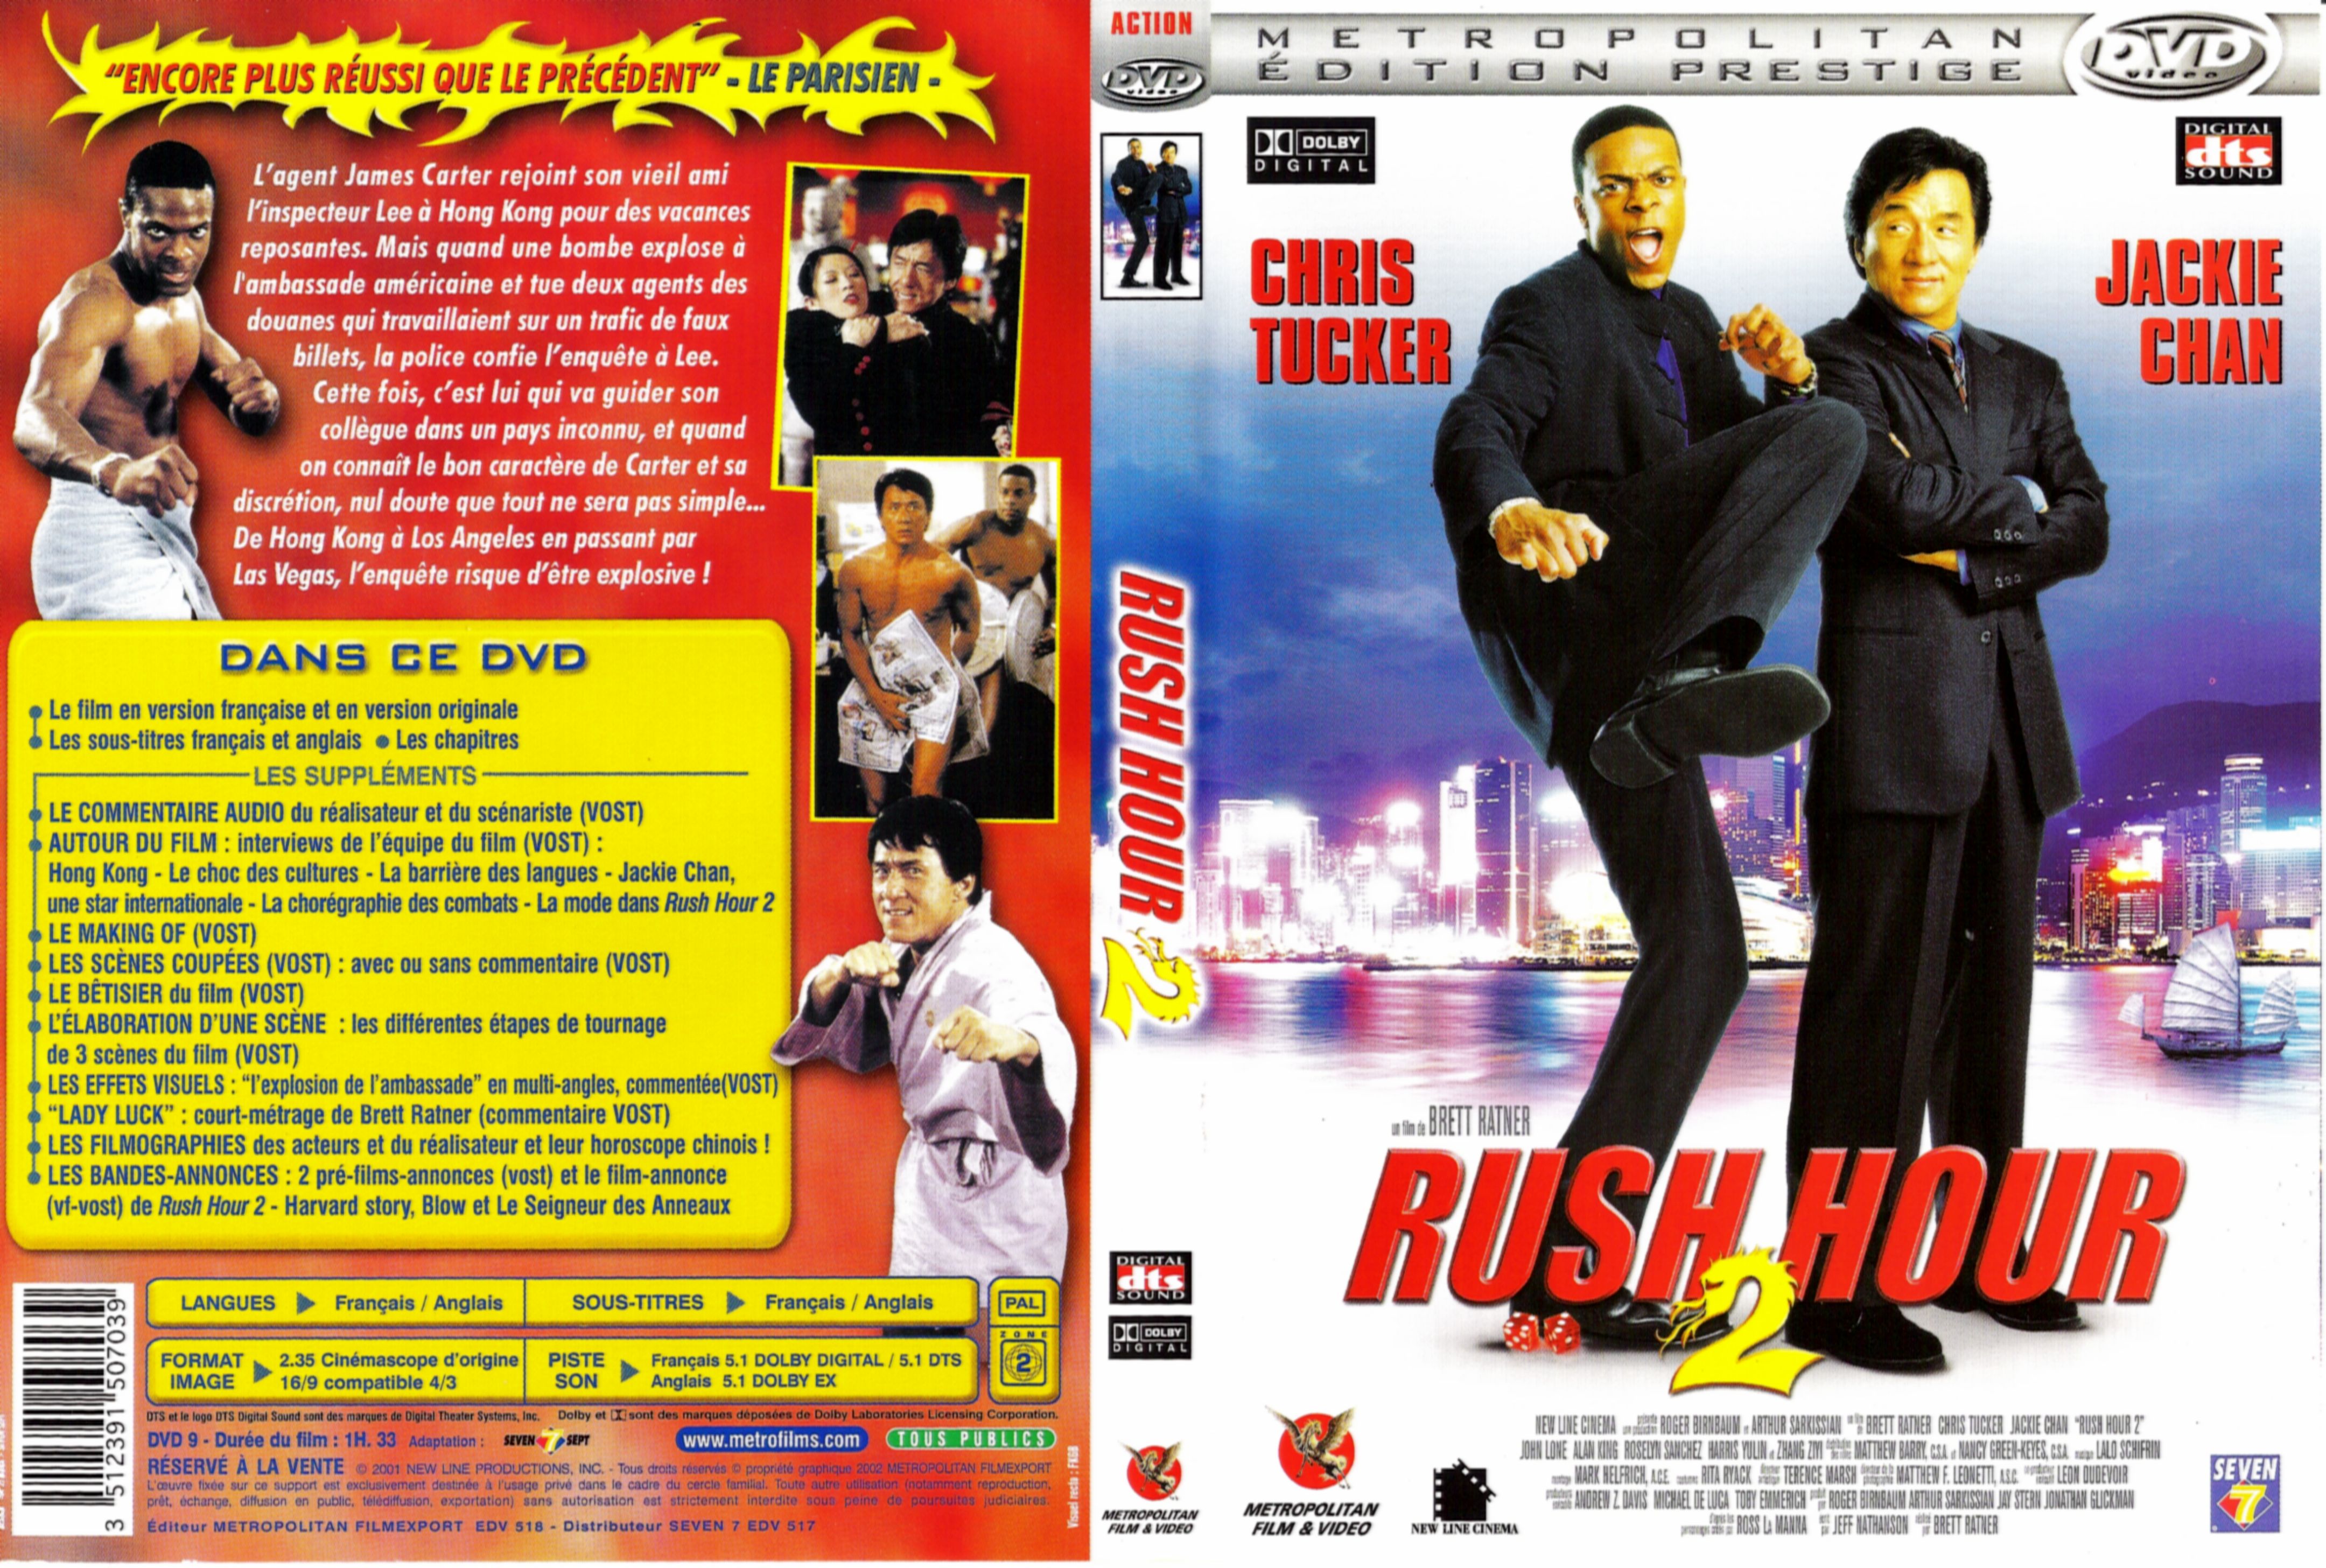 Jaquette DVD Rush hour 2